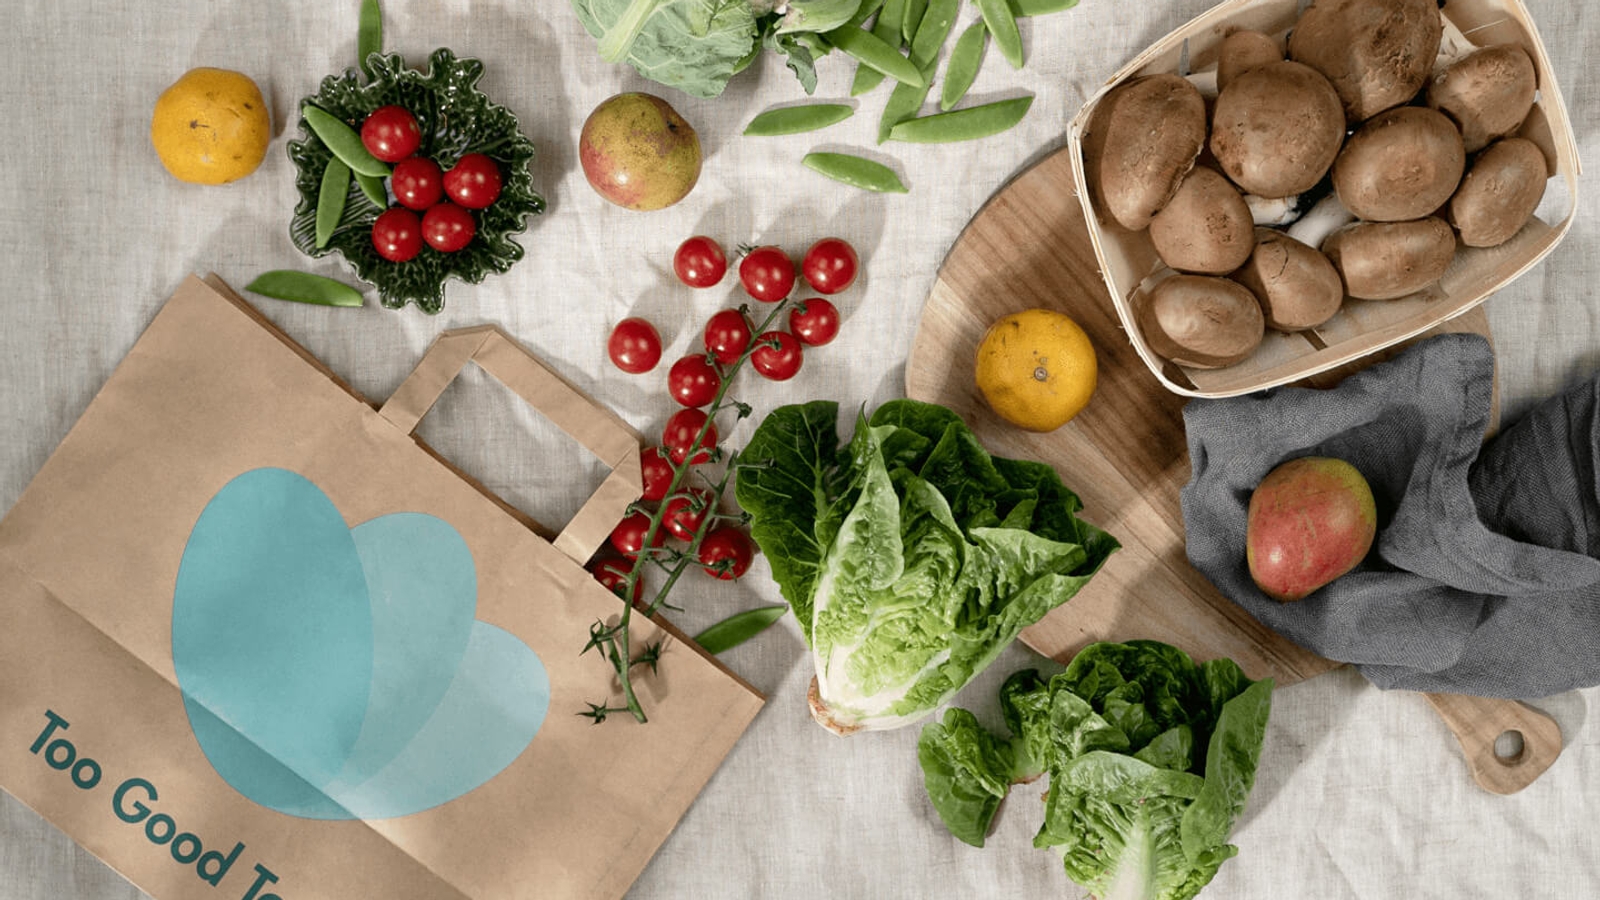 A collection of fresh vegetables including lettuce, mushrooms, and tomatoes next to a brown paper bag with the 'Too Good To Go' logo, indicating food rescue efforts.